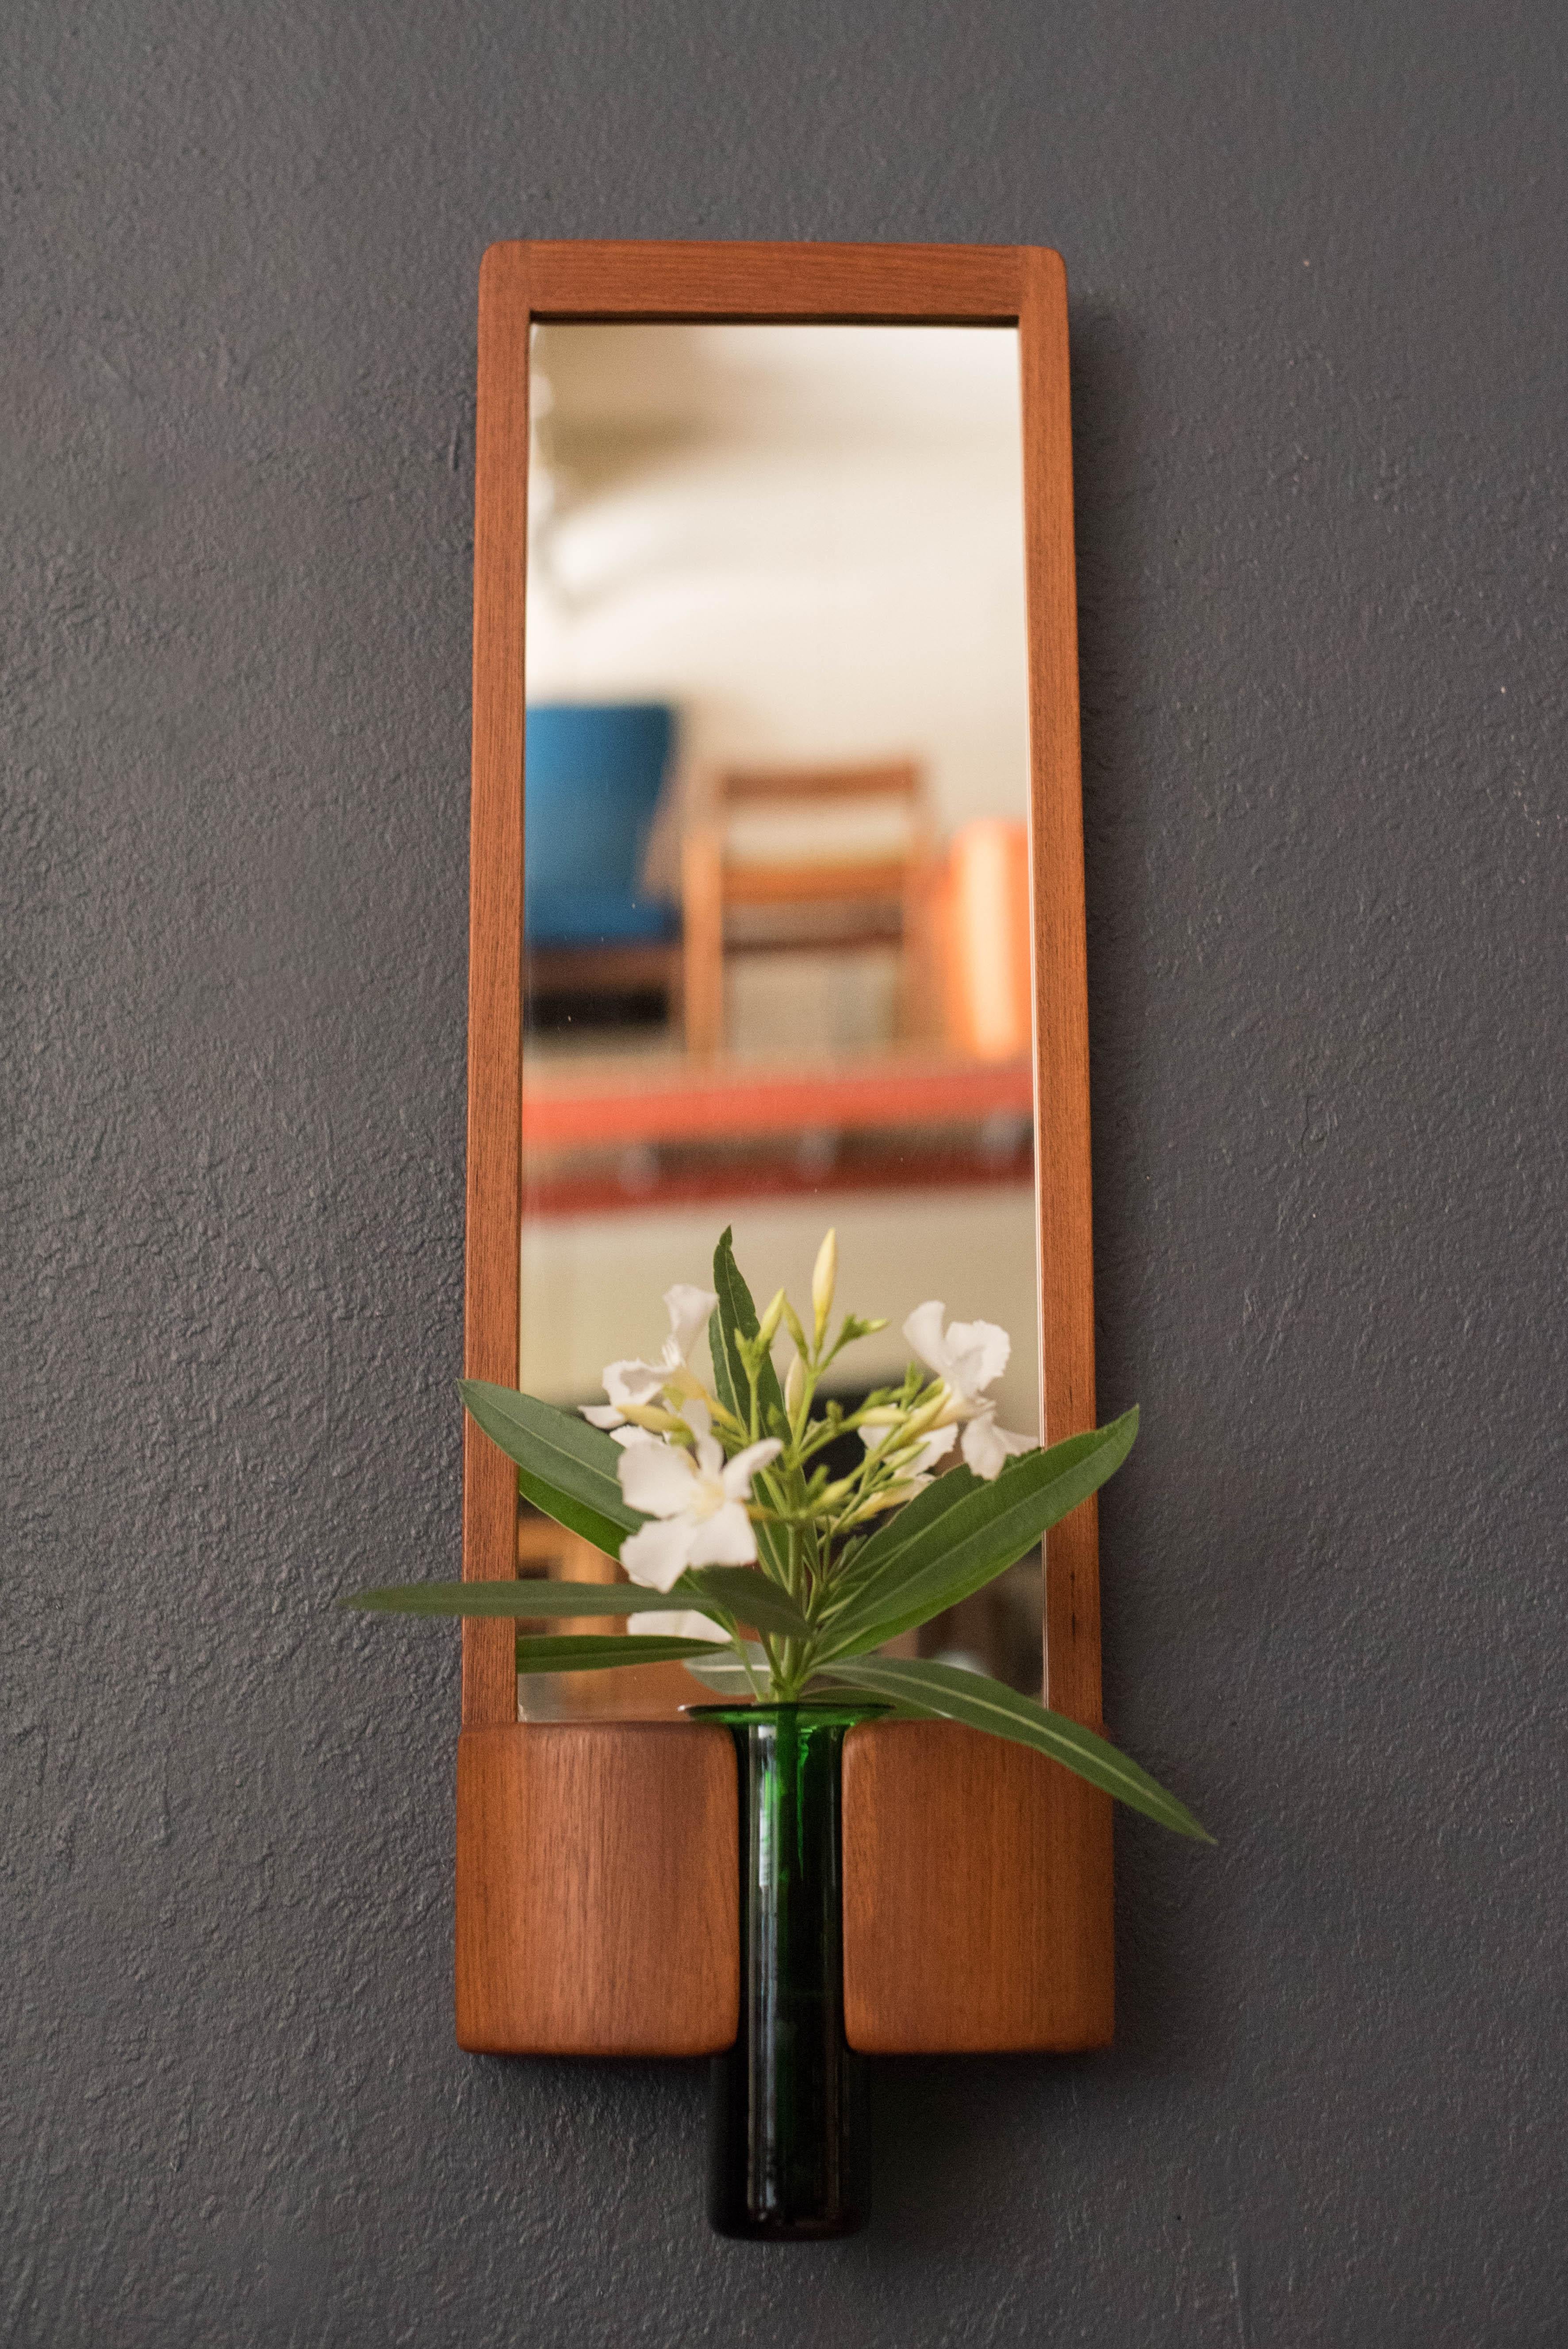 Mid-Century Modern hanging wall mirror designed by Jacob Hermann for Randers Møbelfabrik, circa 1960s, Denmark. Features a sculptural teak frame with detailed joinery and includes the original emerald green glass vase by artist Per Lütken of